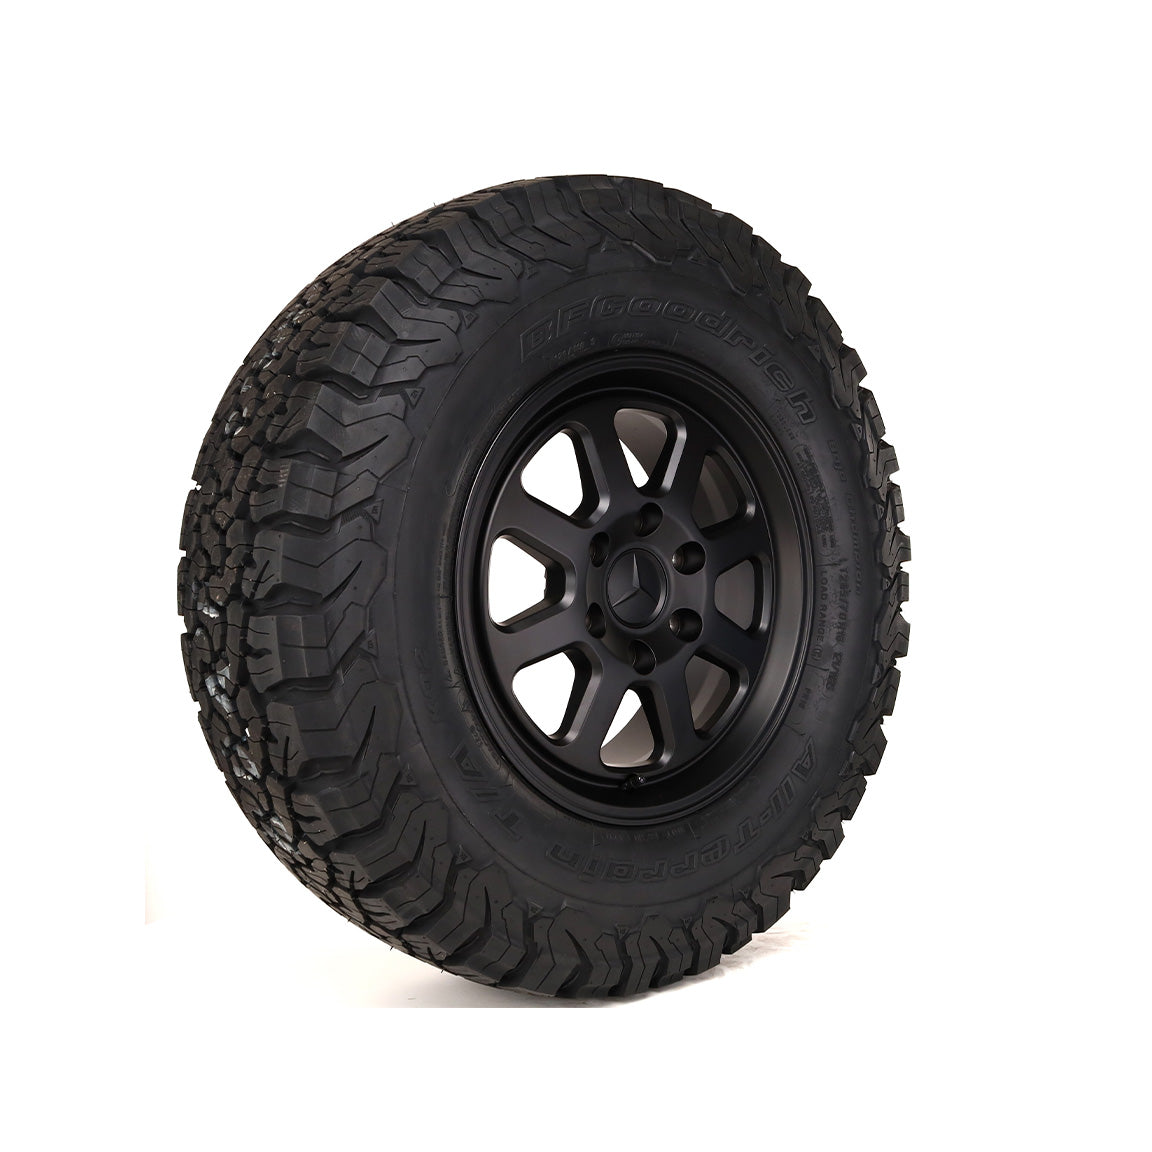 Stealth Wheel and Tire - Black 16" (5 Pack) - Flarespace Adventure Van Conversion Parts